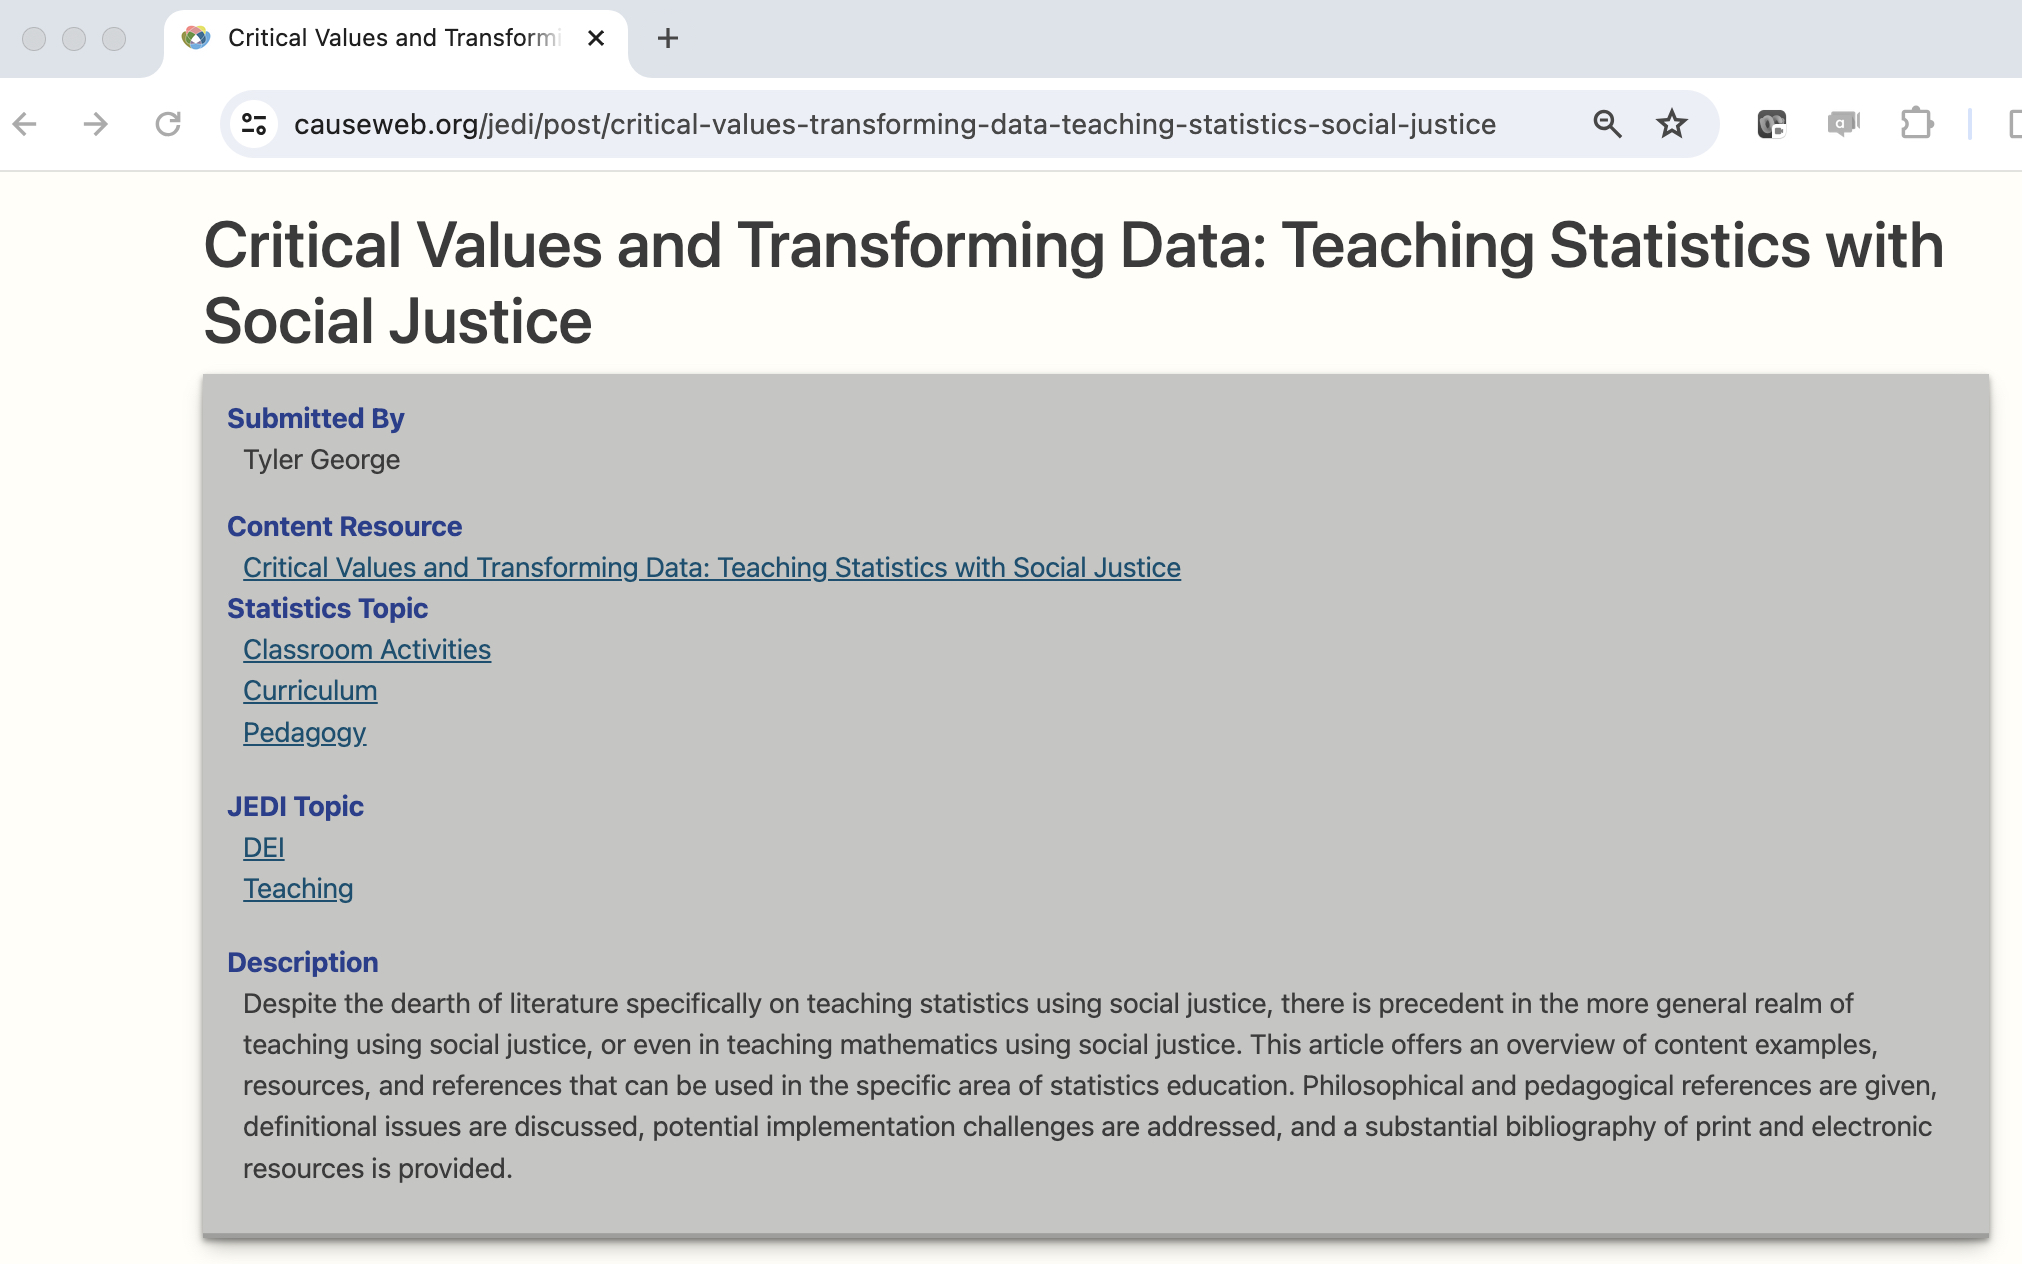 Example 1 showing the author, statistics topics, JEDI topics, and description of the resource.